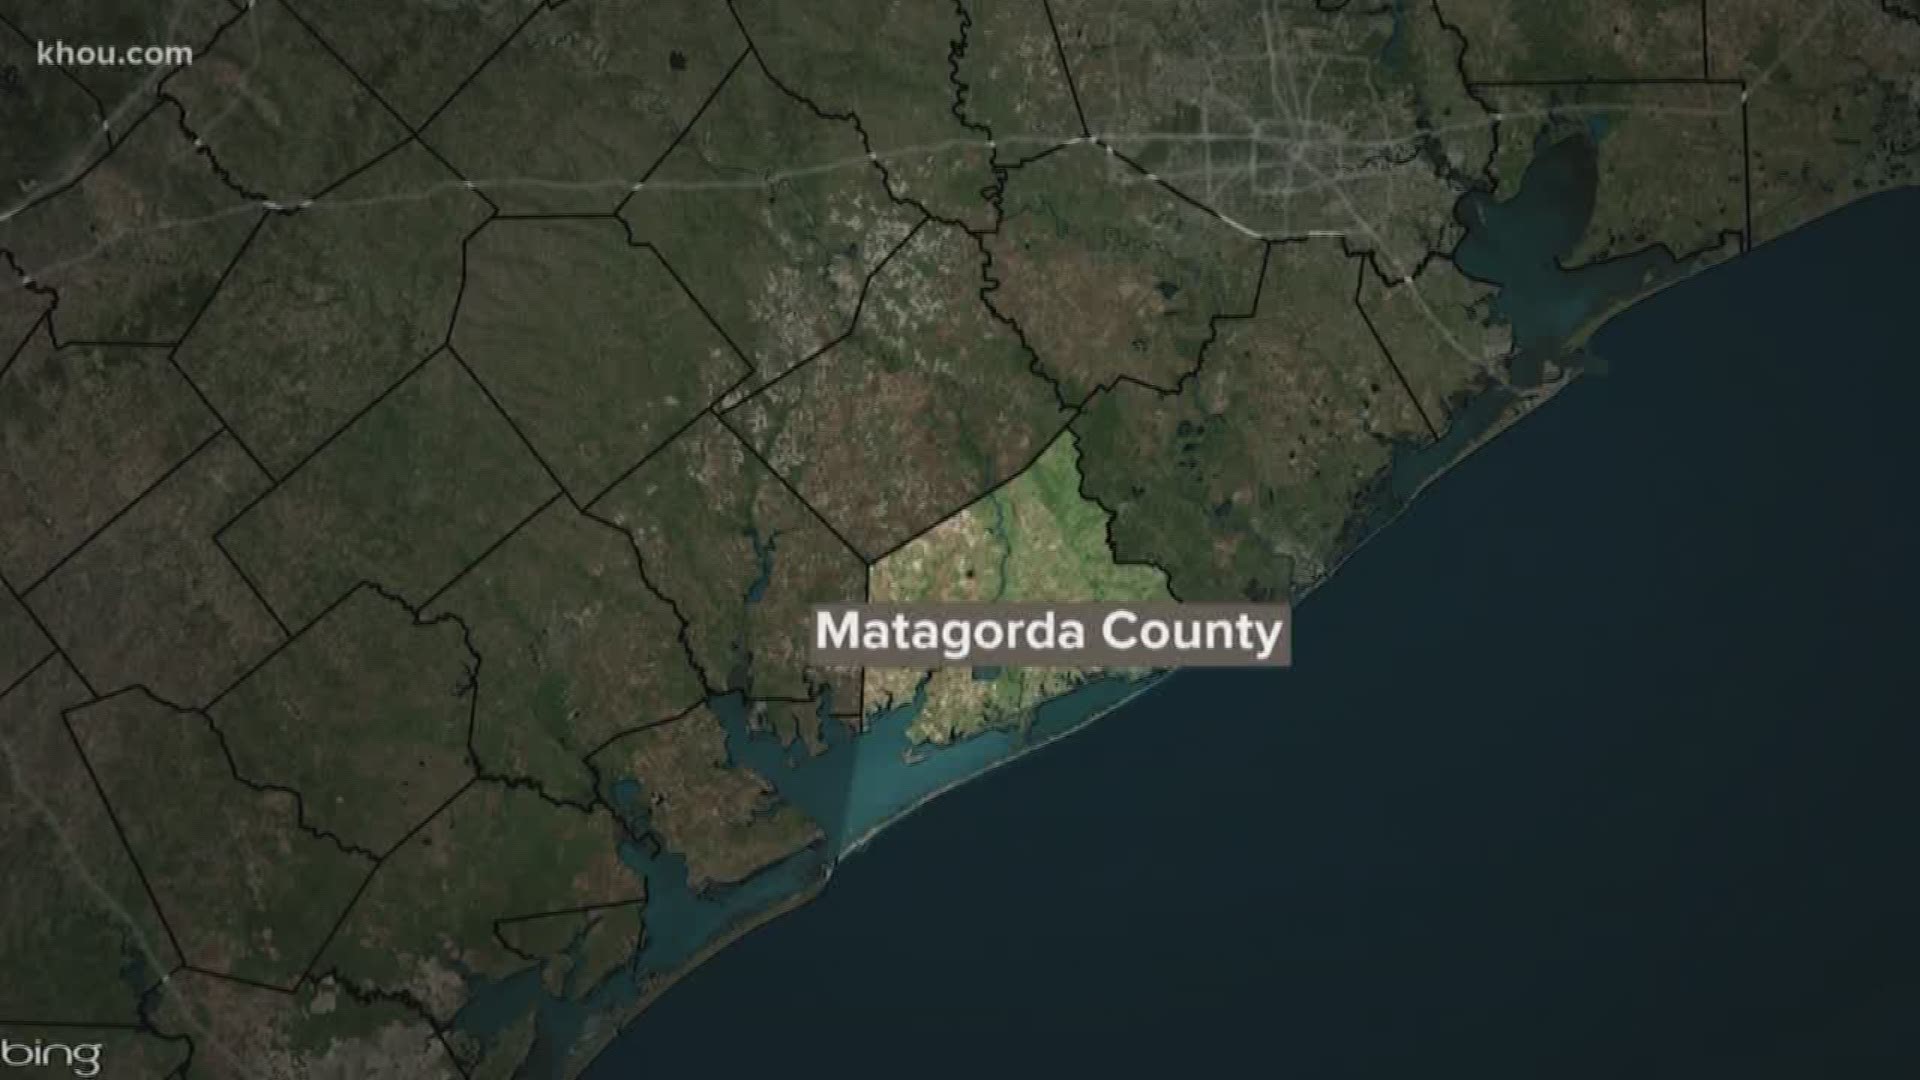 A Matagorda County COVID-19 patient died Sunday, becoming the first coronavirus-related death in Texas.